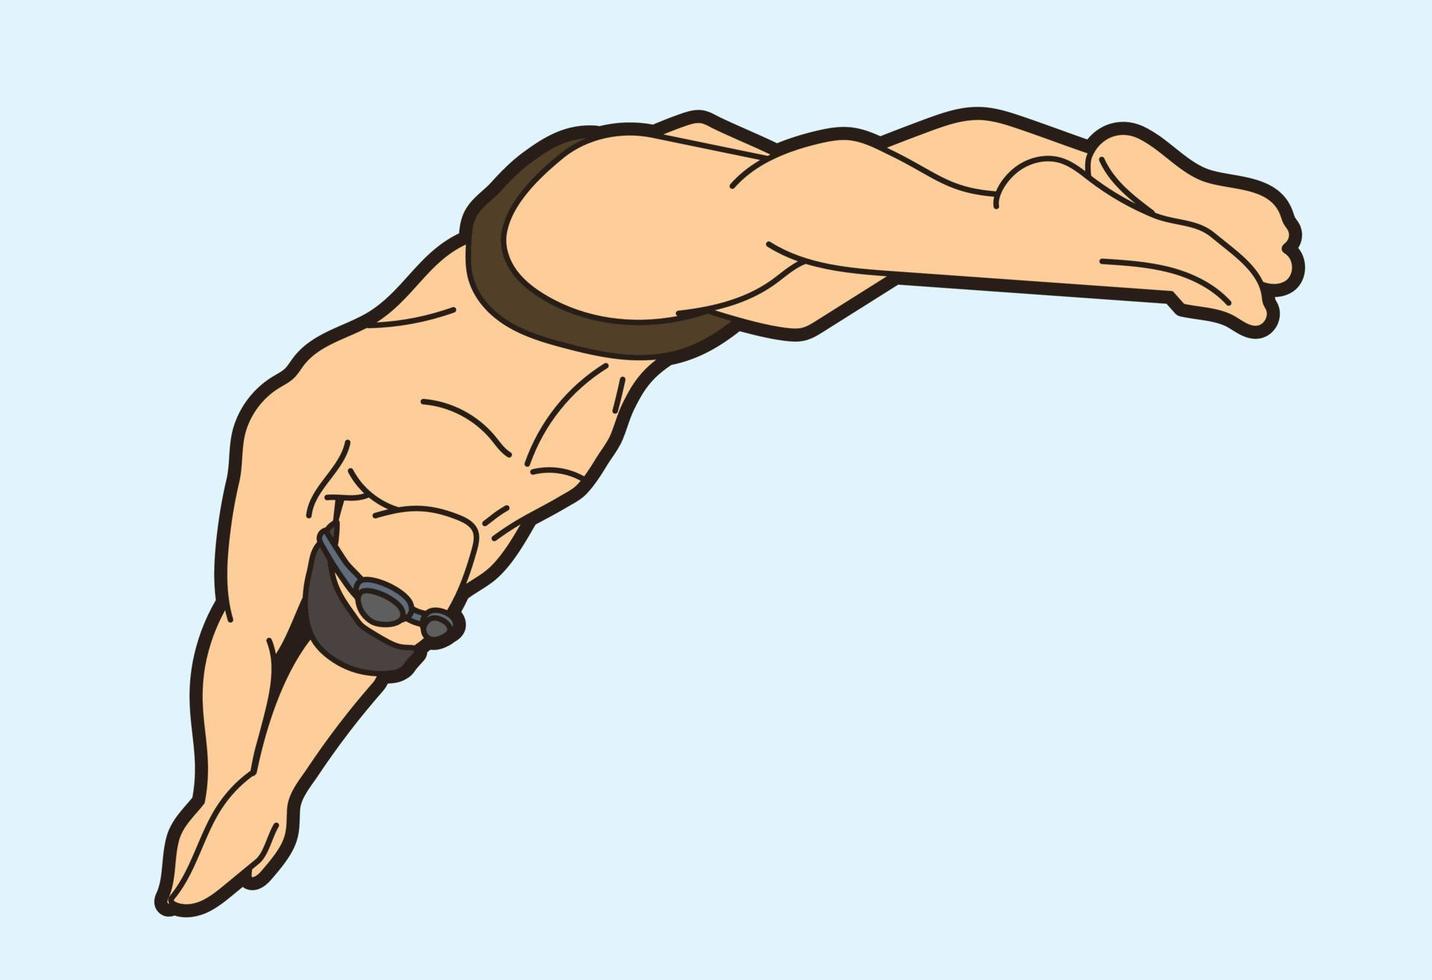 Swimming Sport Swimmer Jumping Action vector